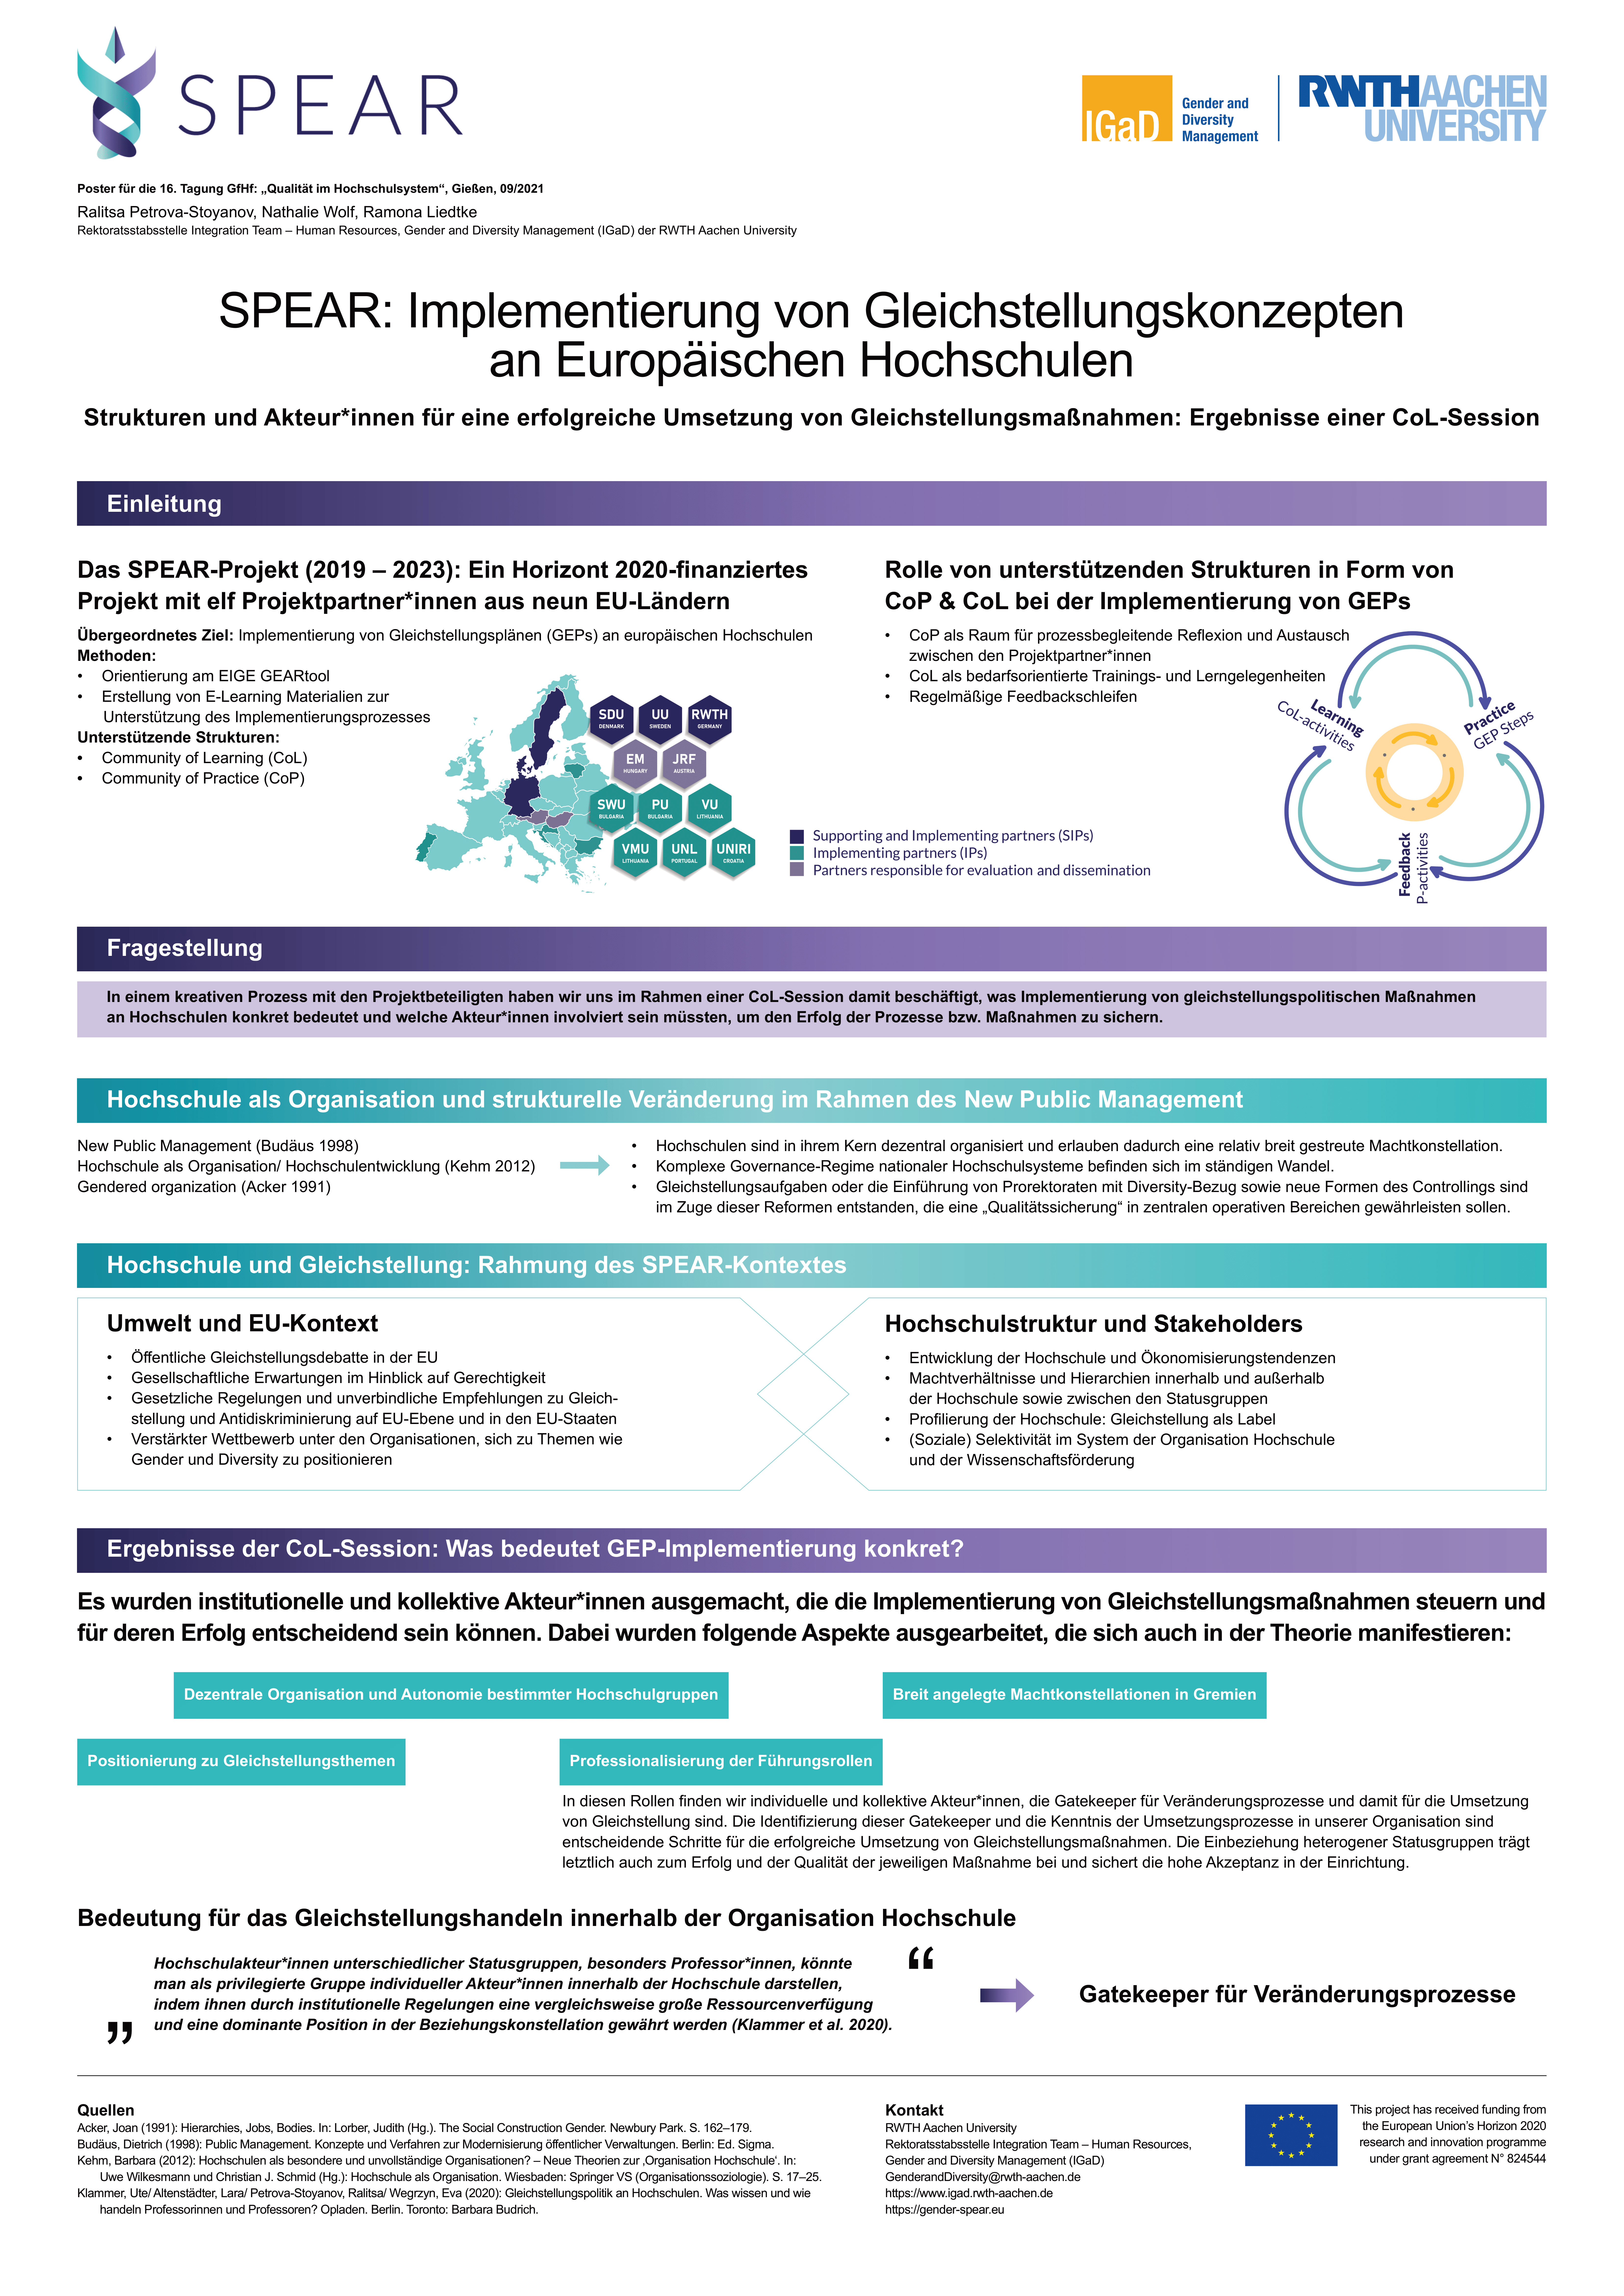 Poster contribution at conference 